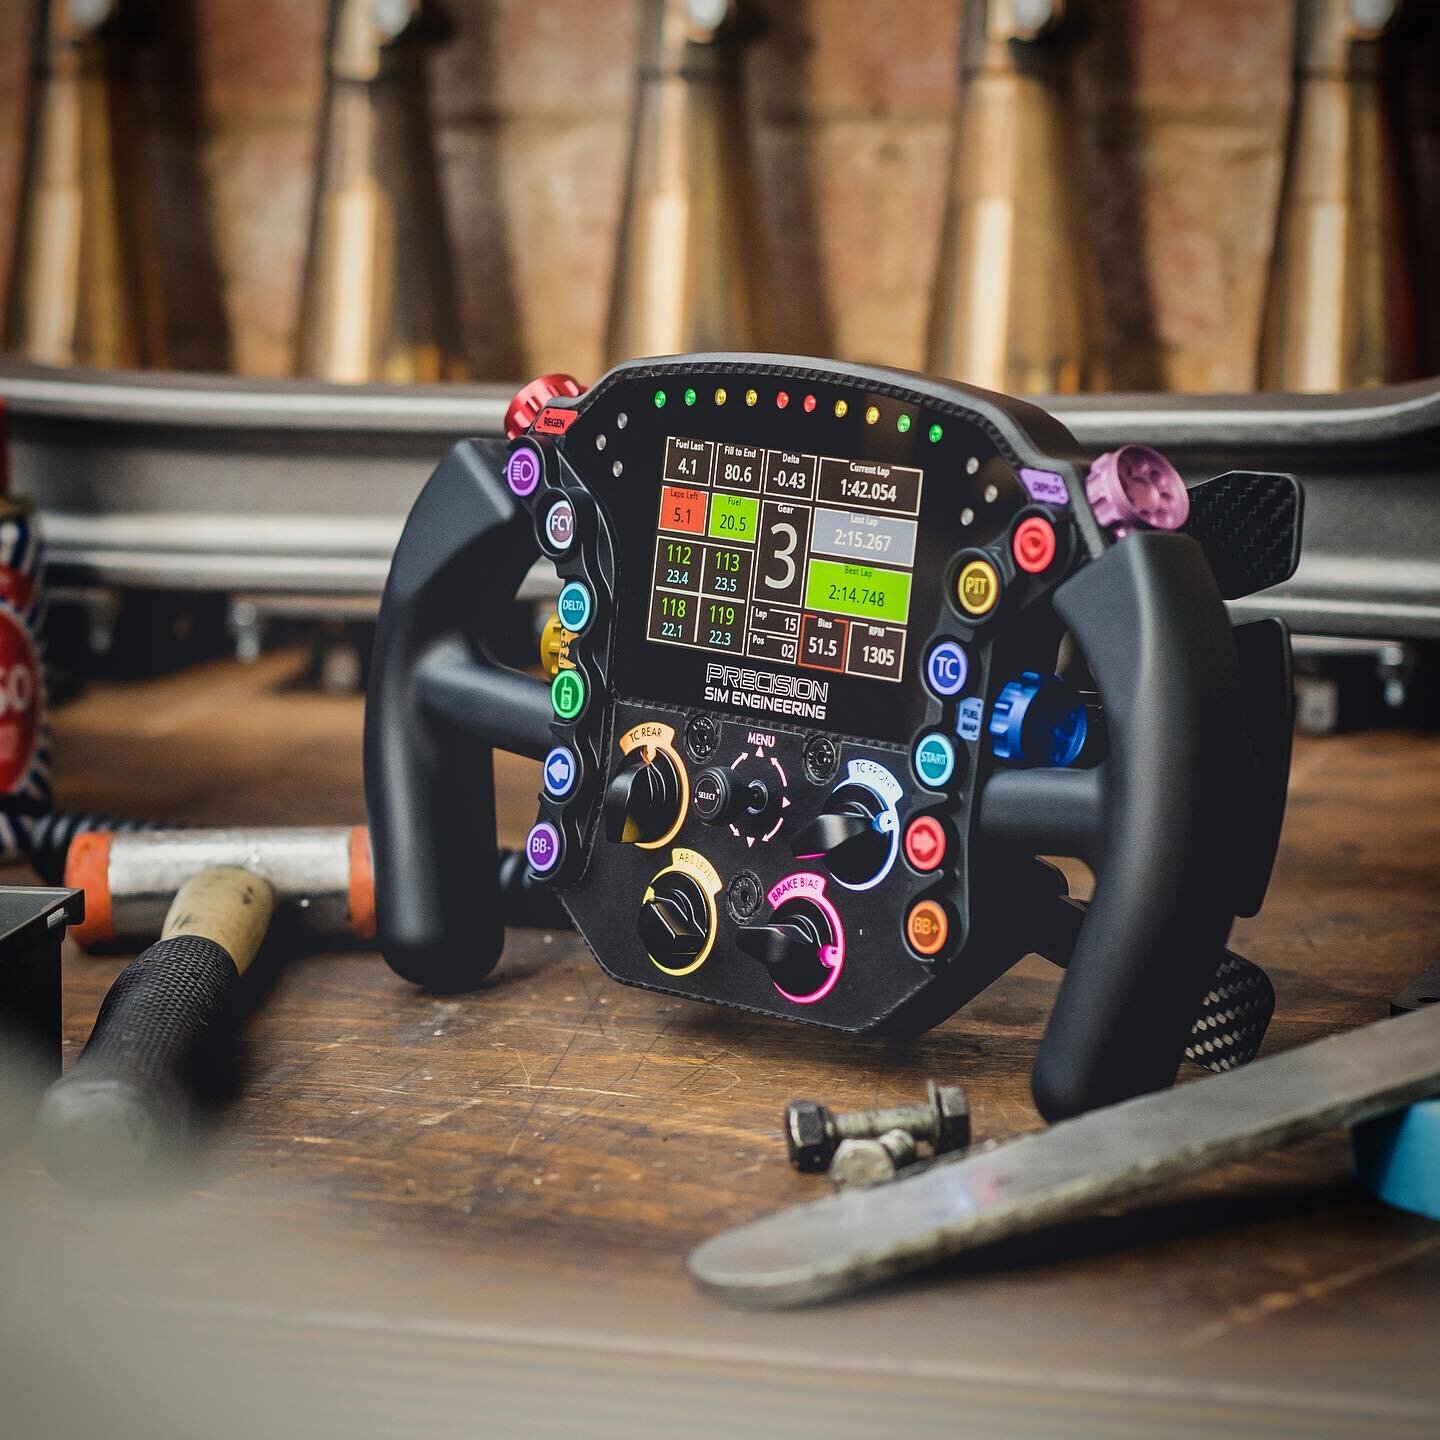 LM-X: Introducing ChromaWorx, our revolutionary full-colour lighting system. One wheel, endless possibilities...

Shape your experience, 20-11-20.

Photo Credit: Amy Shore Photography

#LM-X #LM-Pro #GPX #GT1 #GT3 #precisionsimengineering #simracingh